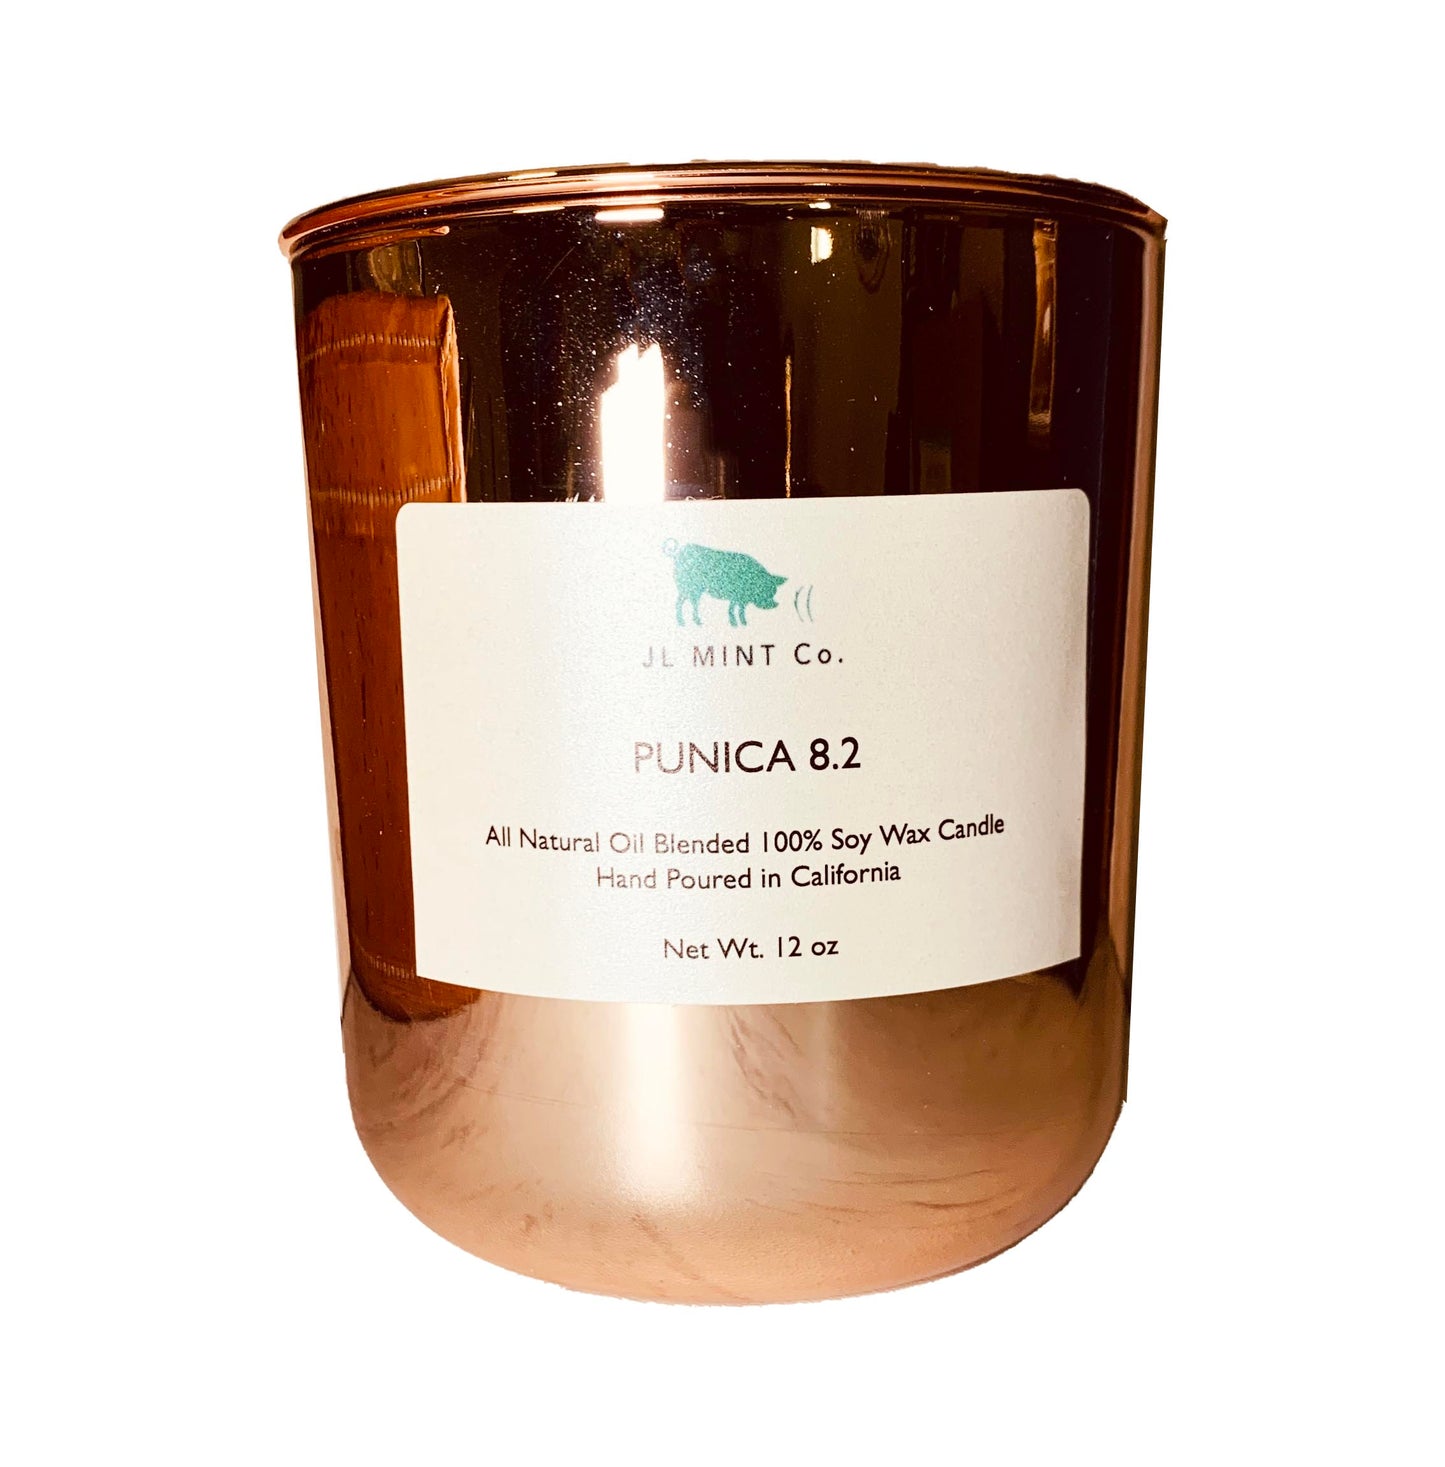 Punica 8.2 JL Mint Co. Soy Wax Large Candle